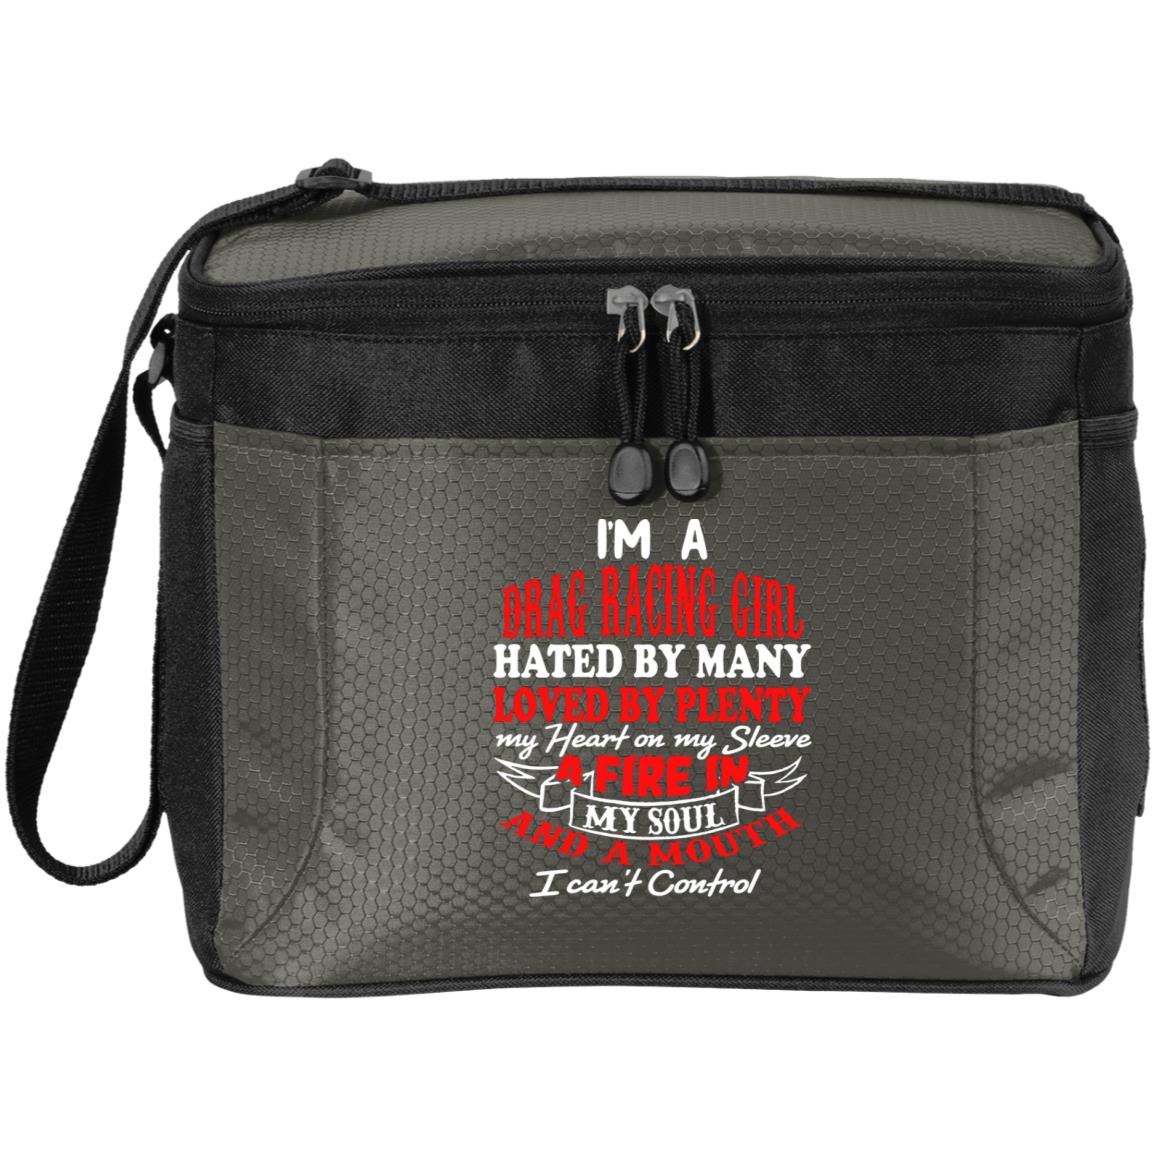 I'm A Drag Racing Girl Hated By Many Loved By Plenty 12-Pack Cooler